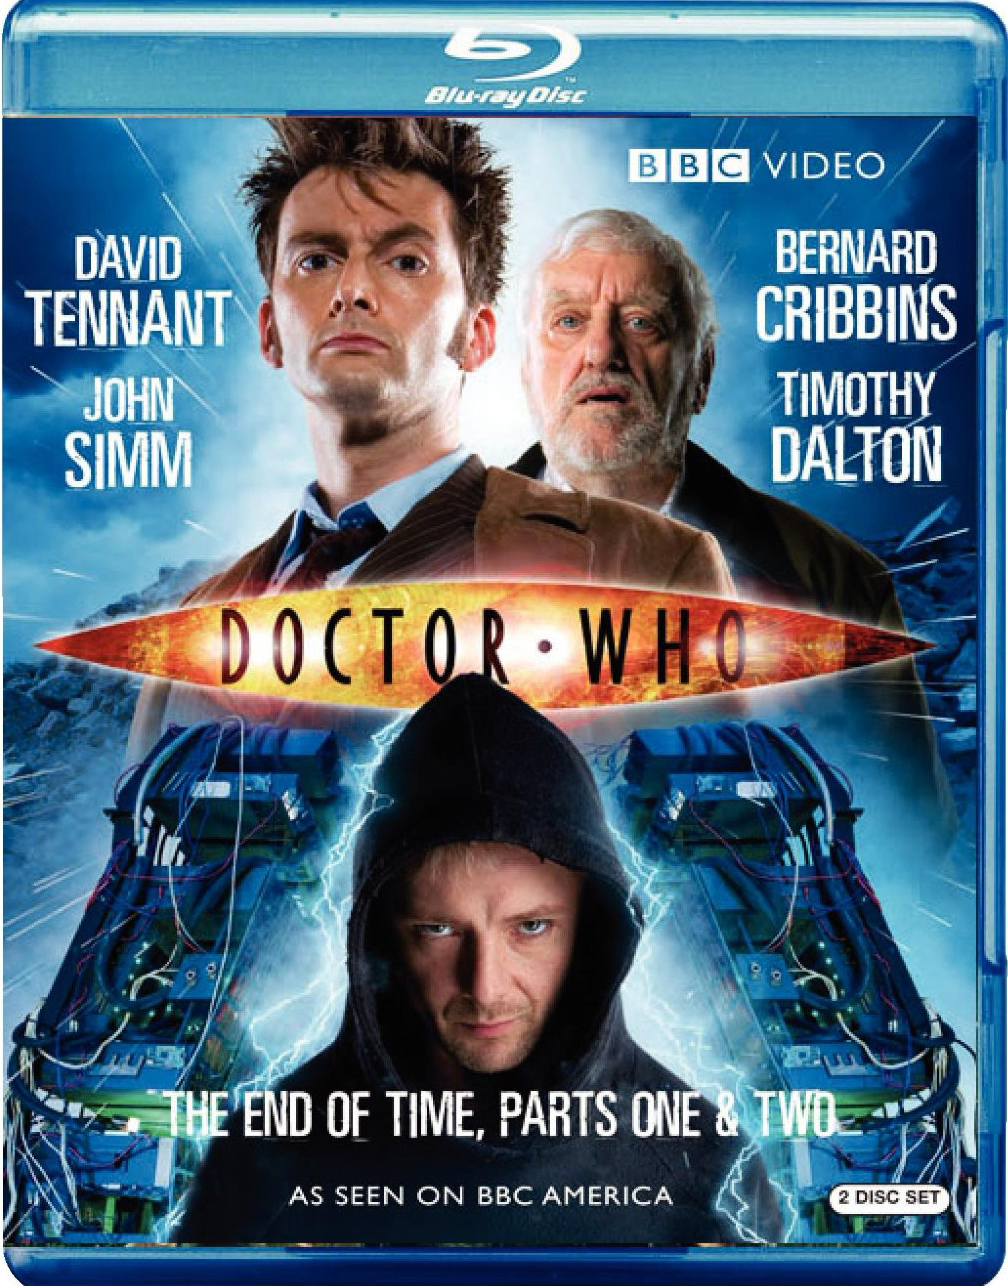 Doctor Who: End of Time 1 & 2